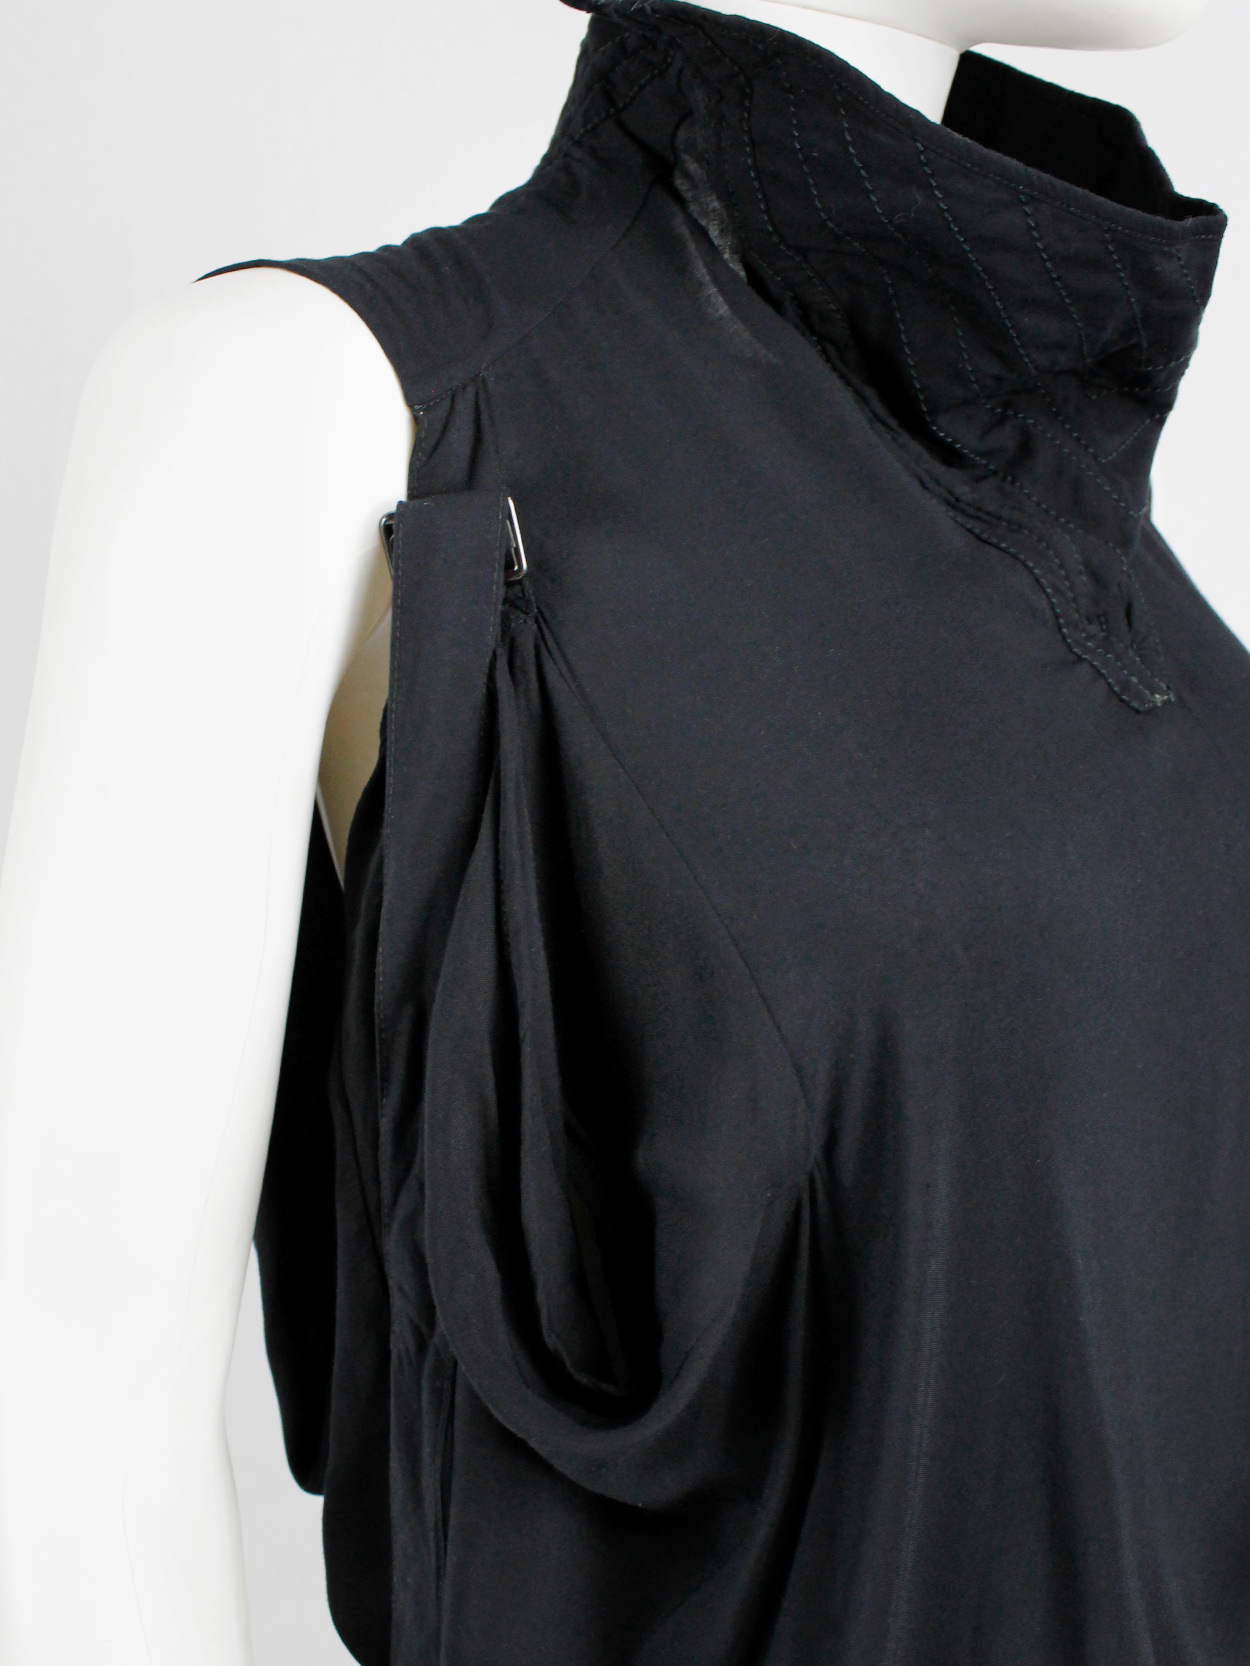 vaniitas Ann Demeulemeester black dress with straps and stitched collar spring 2010 (16)